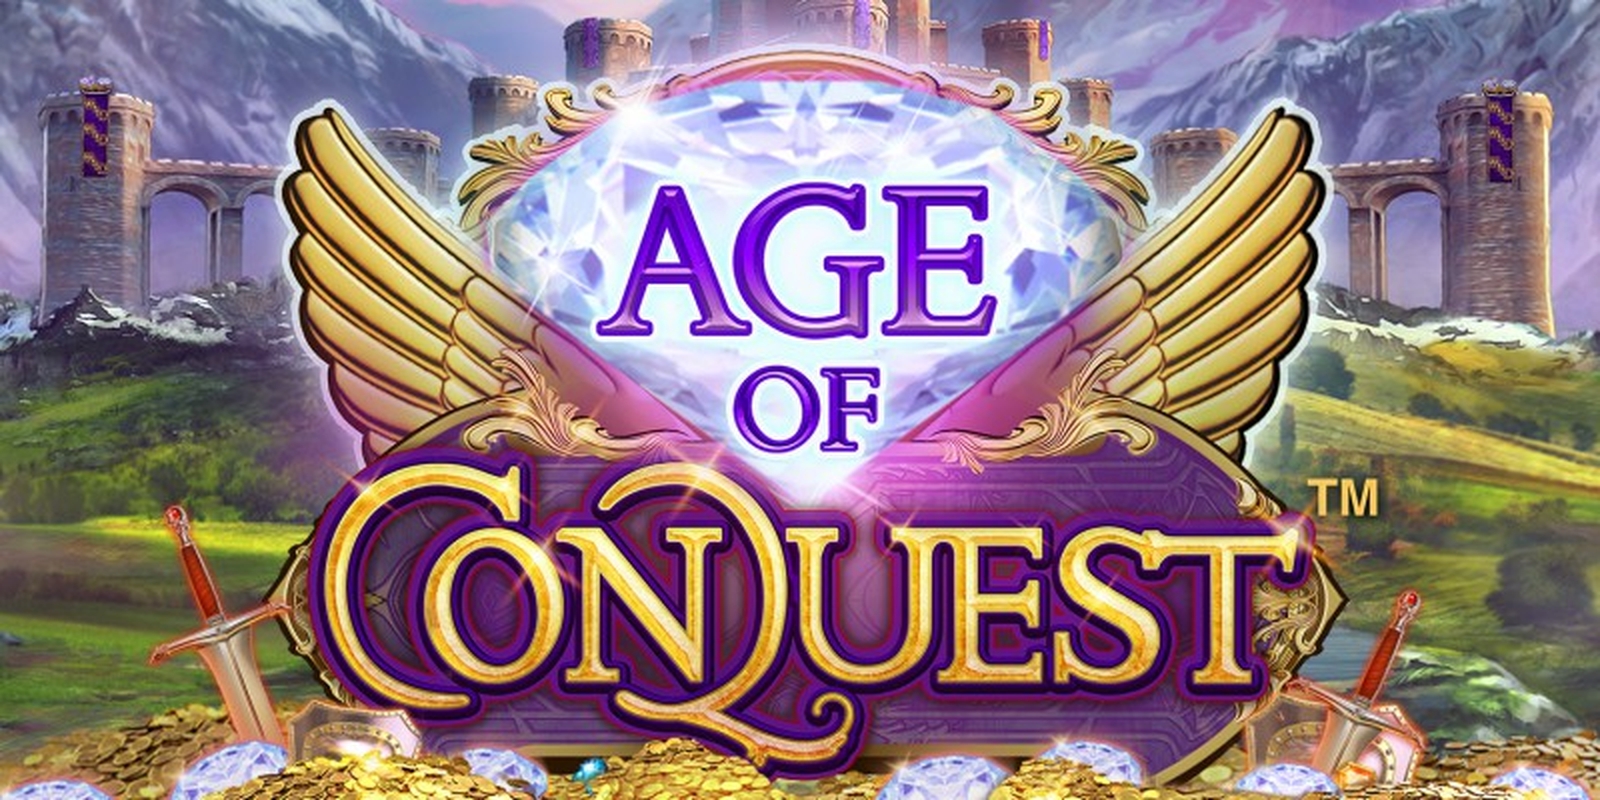 The Age of Conquest Online Slot Demo Game by Neon Valley Studios